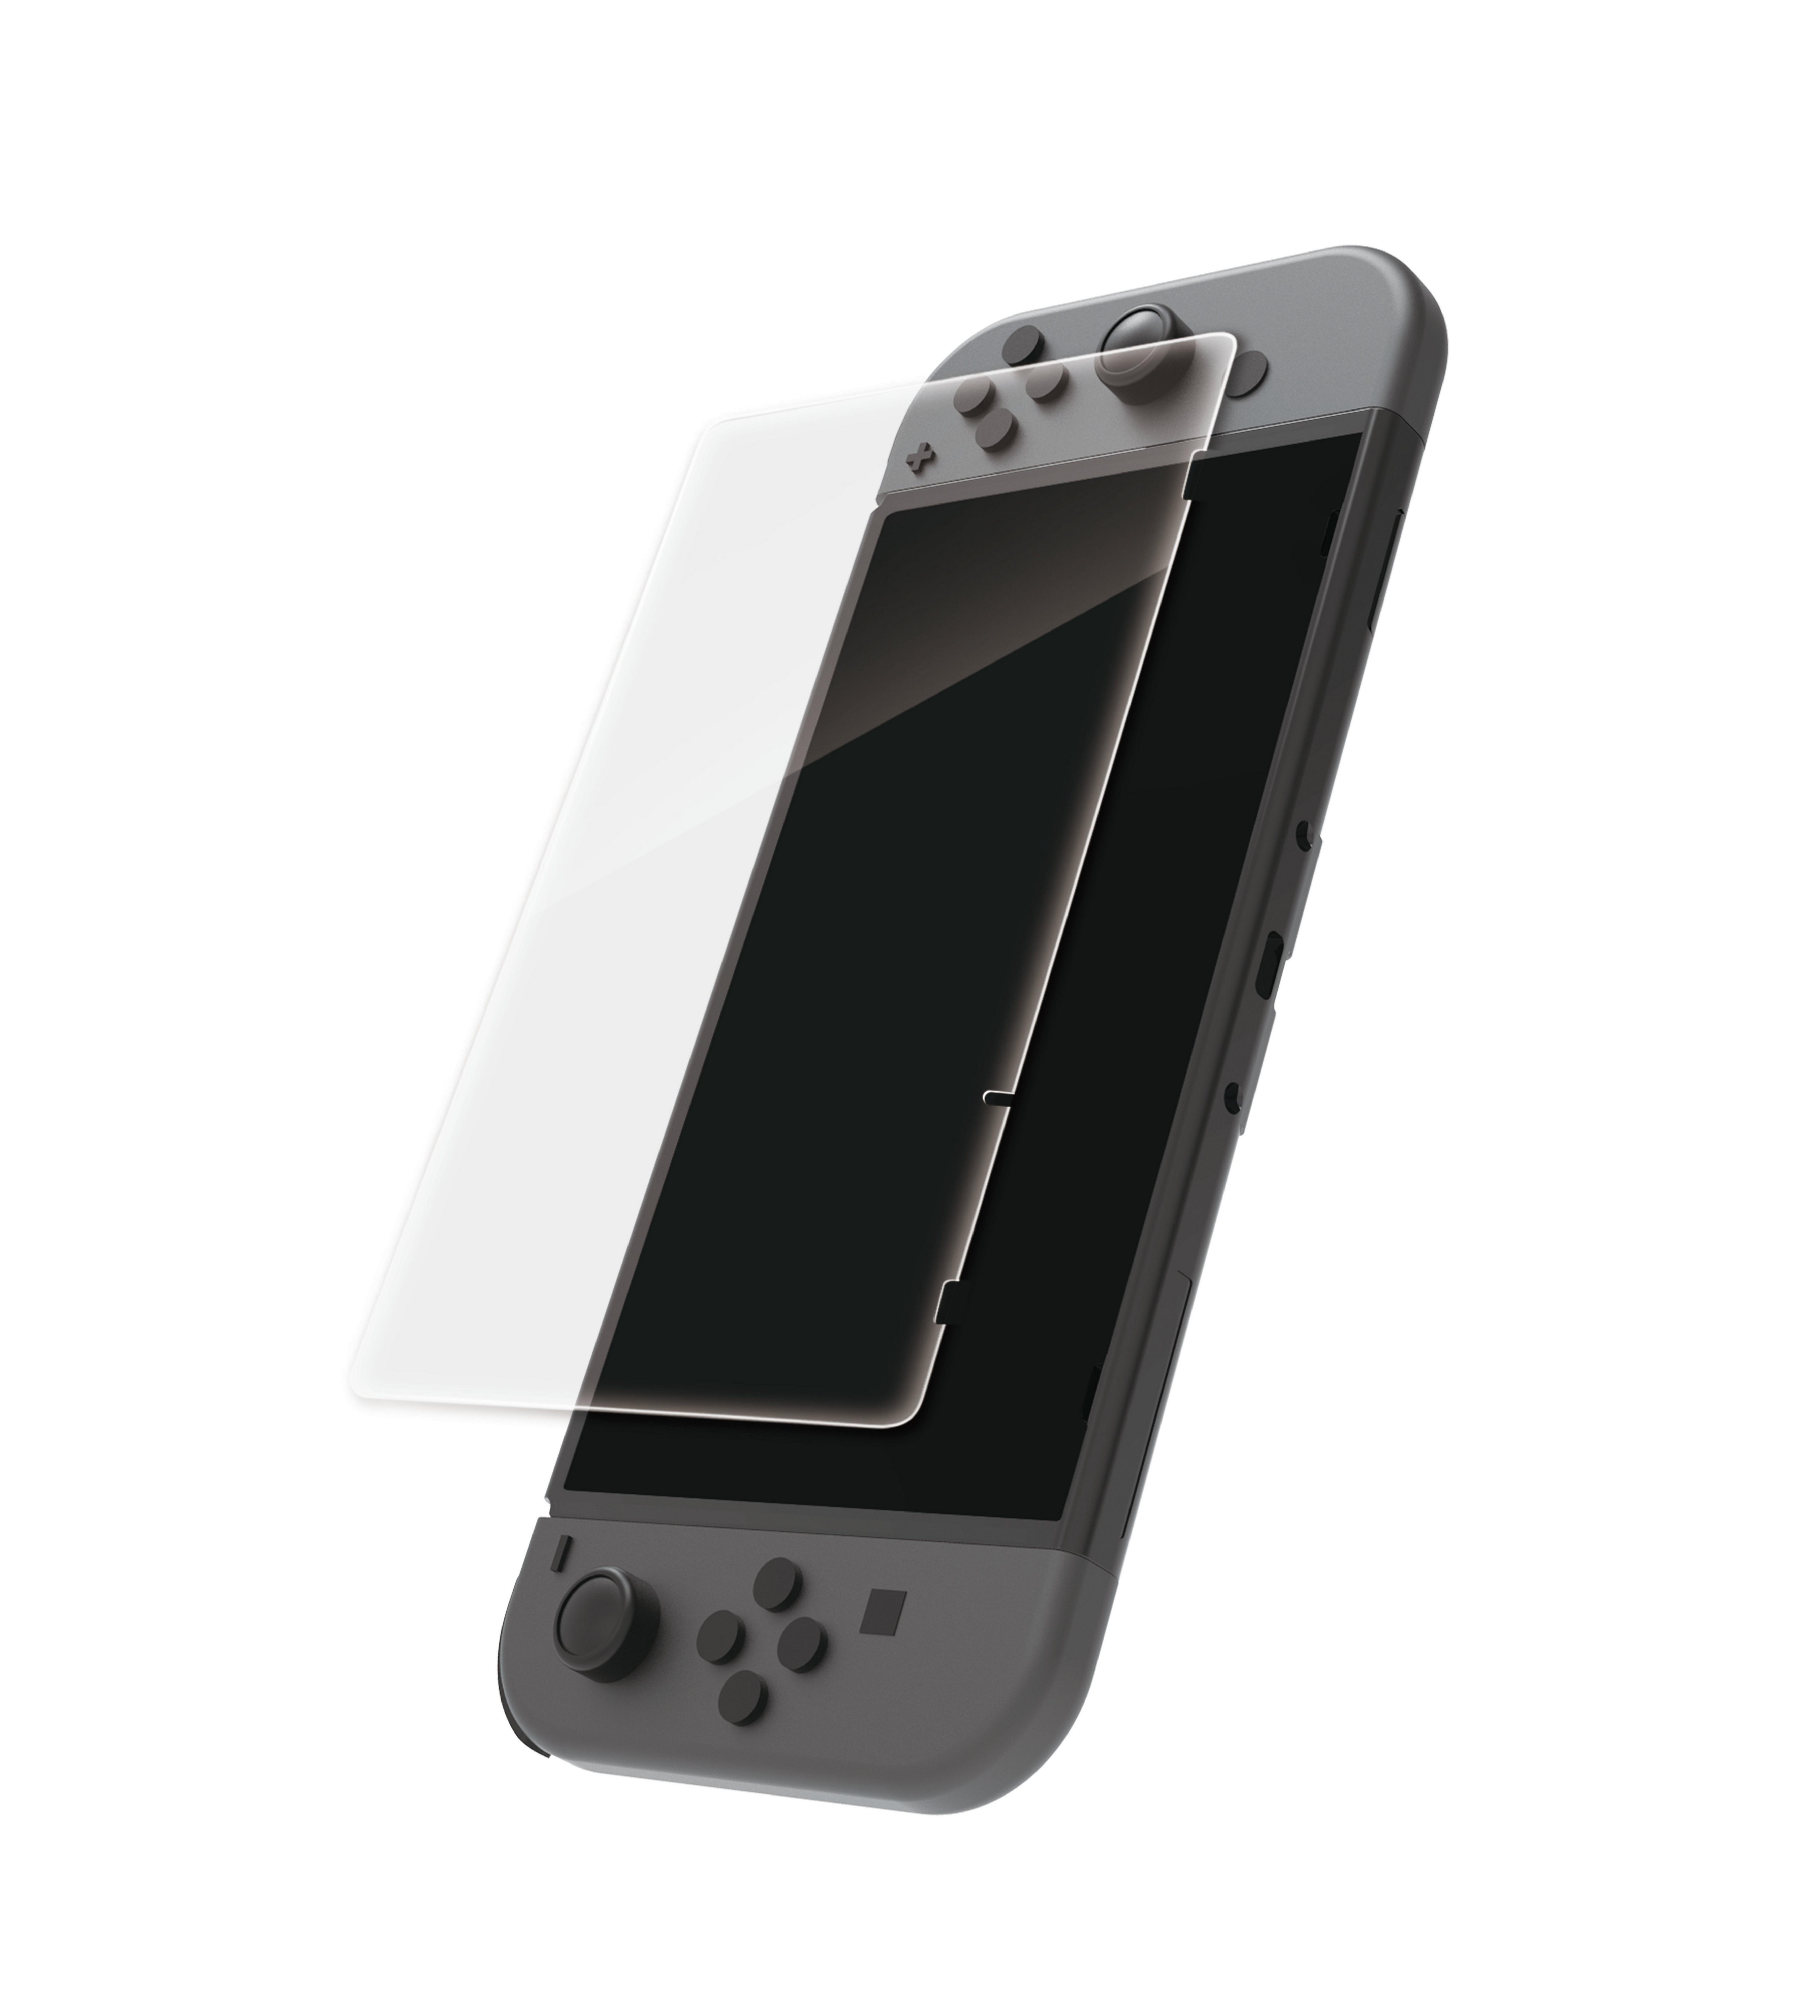 does the nintendo switch come with a screen protector